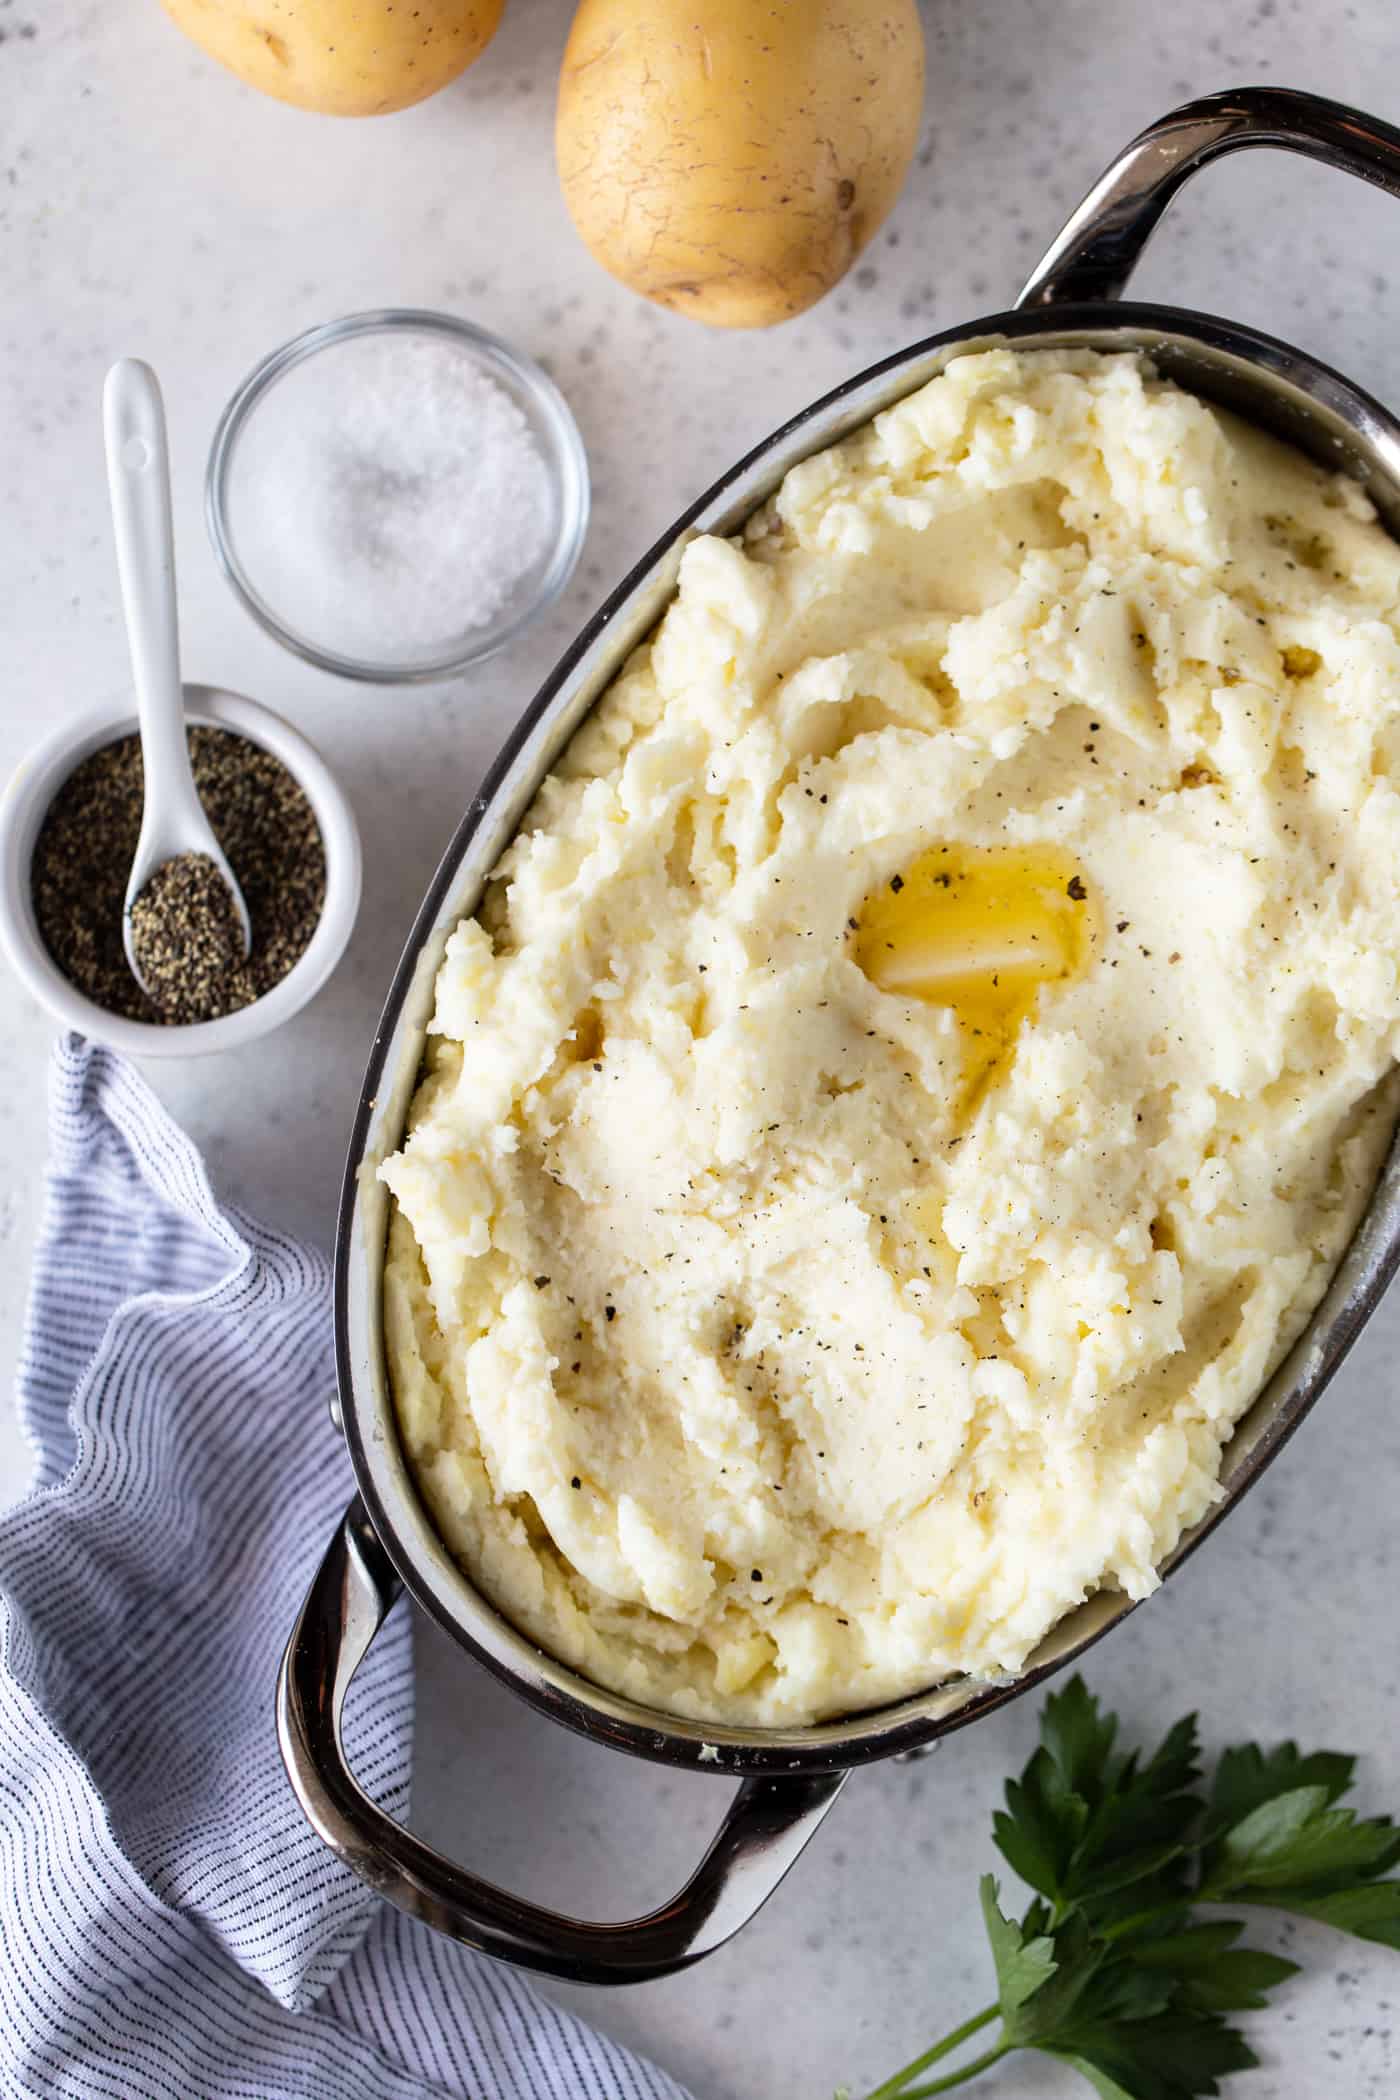 Mashed potato in a stainless steel oval baking dish with melted butter, salt and pepper on top.